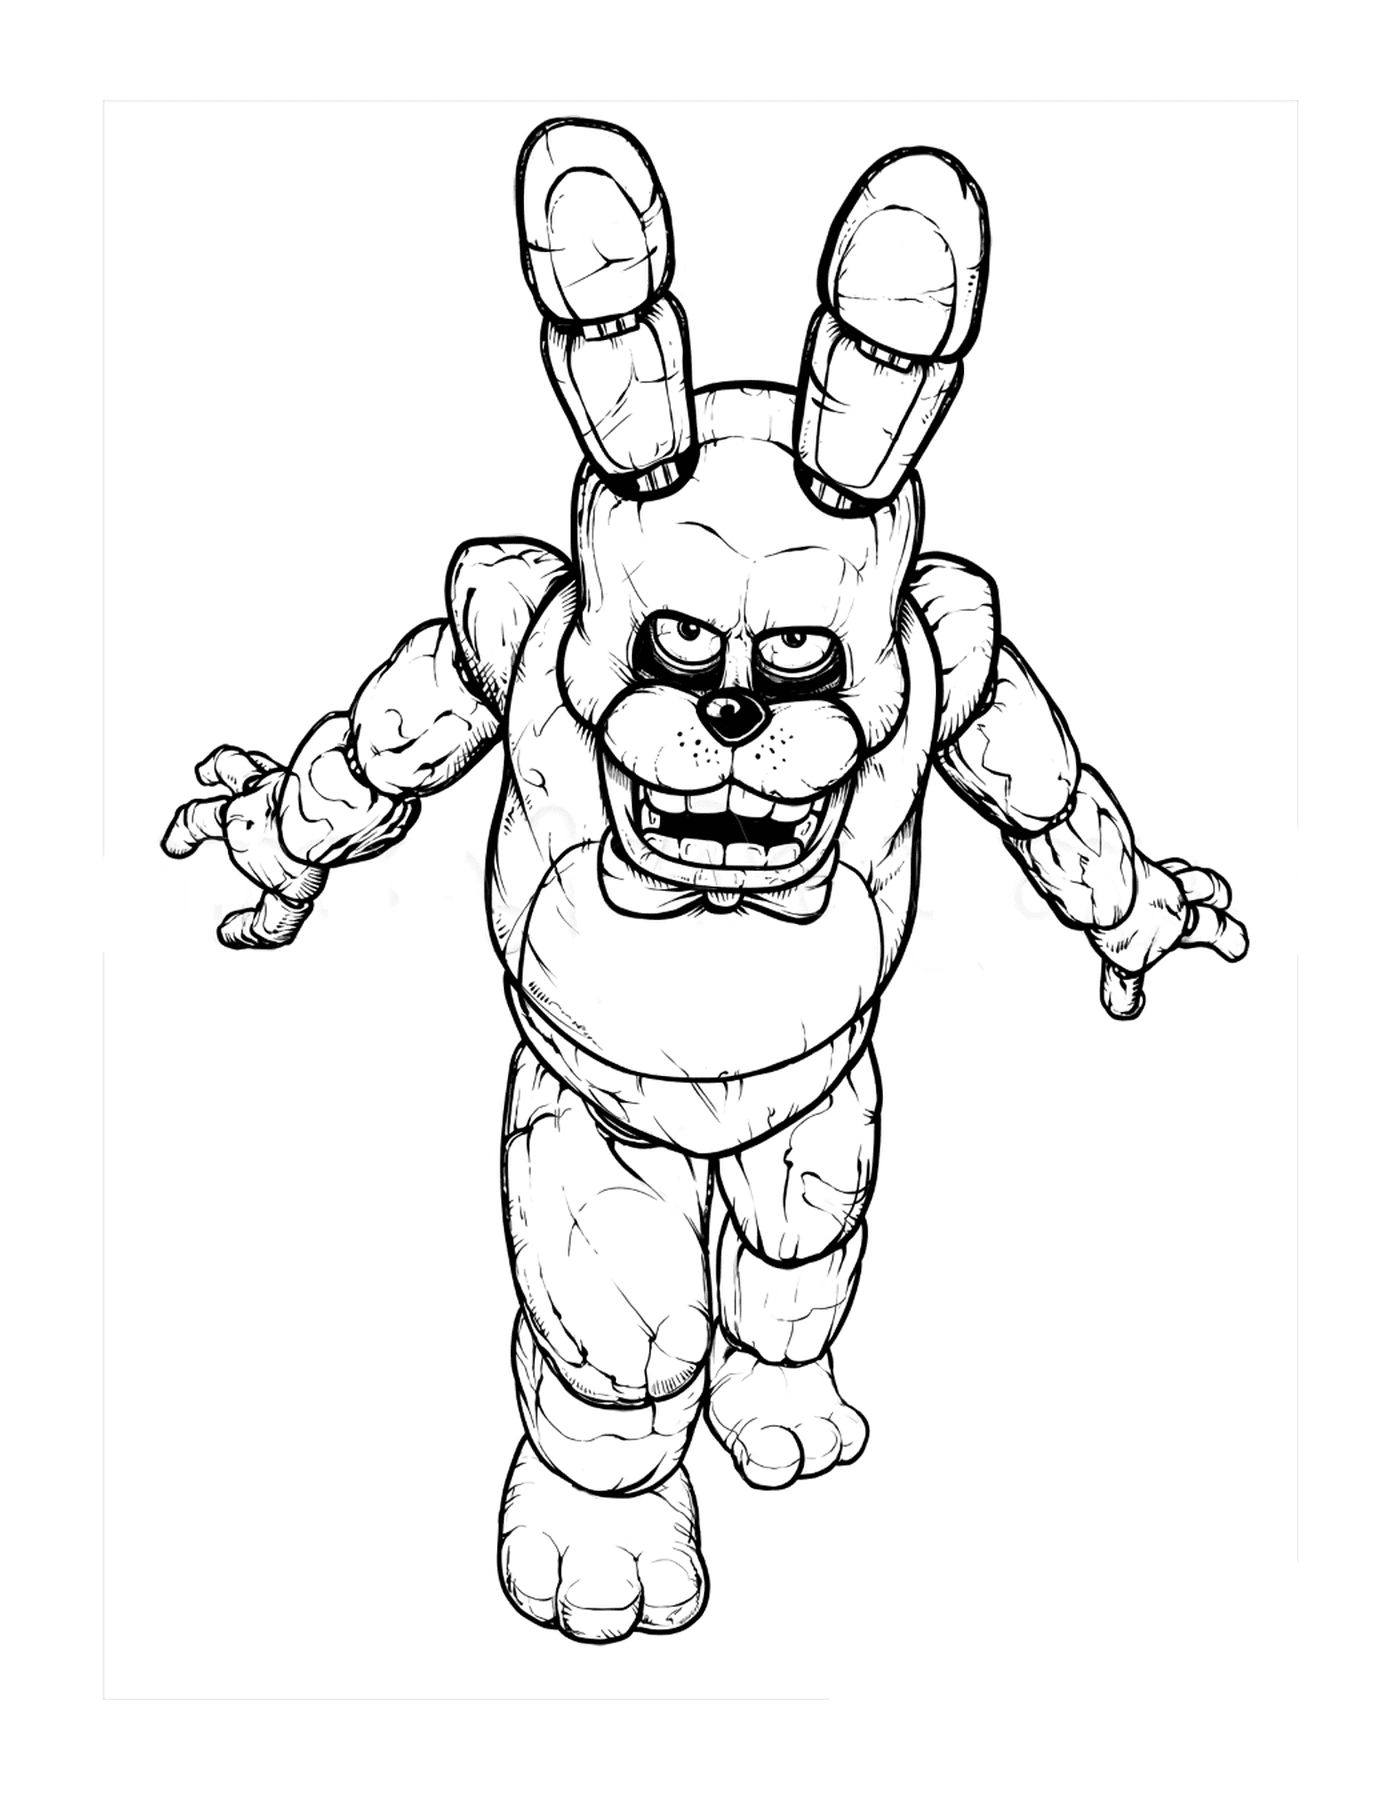  A character from Five Nights at Freddy's 